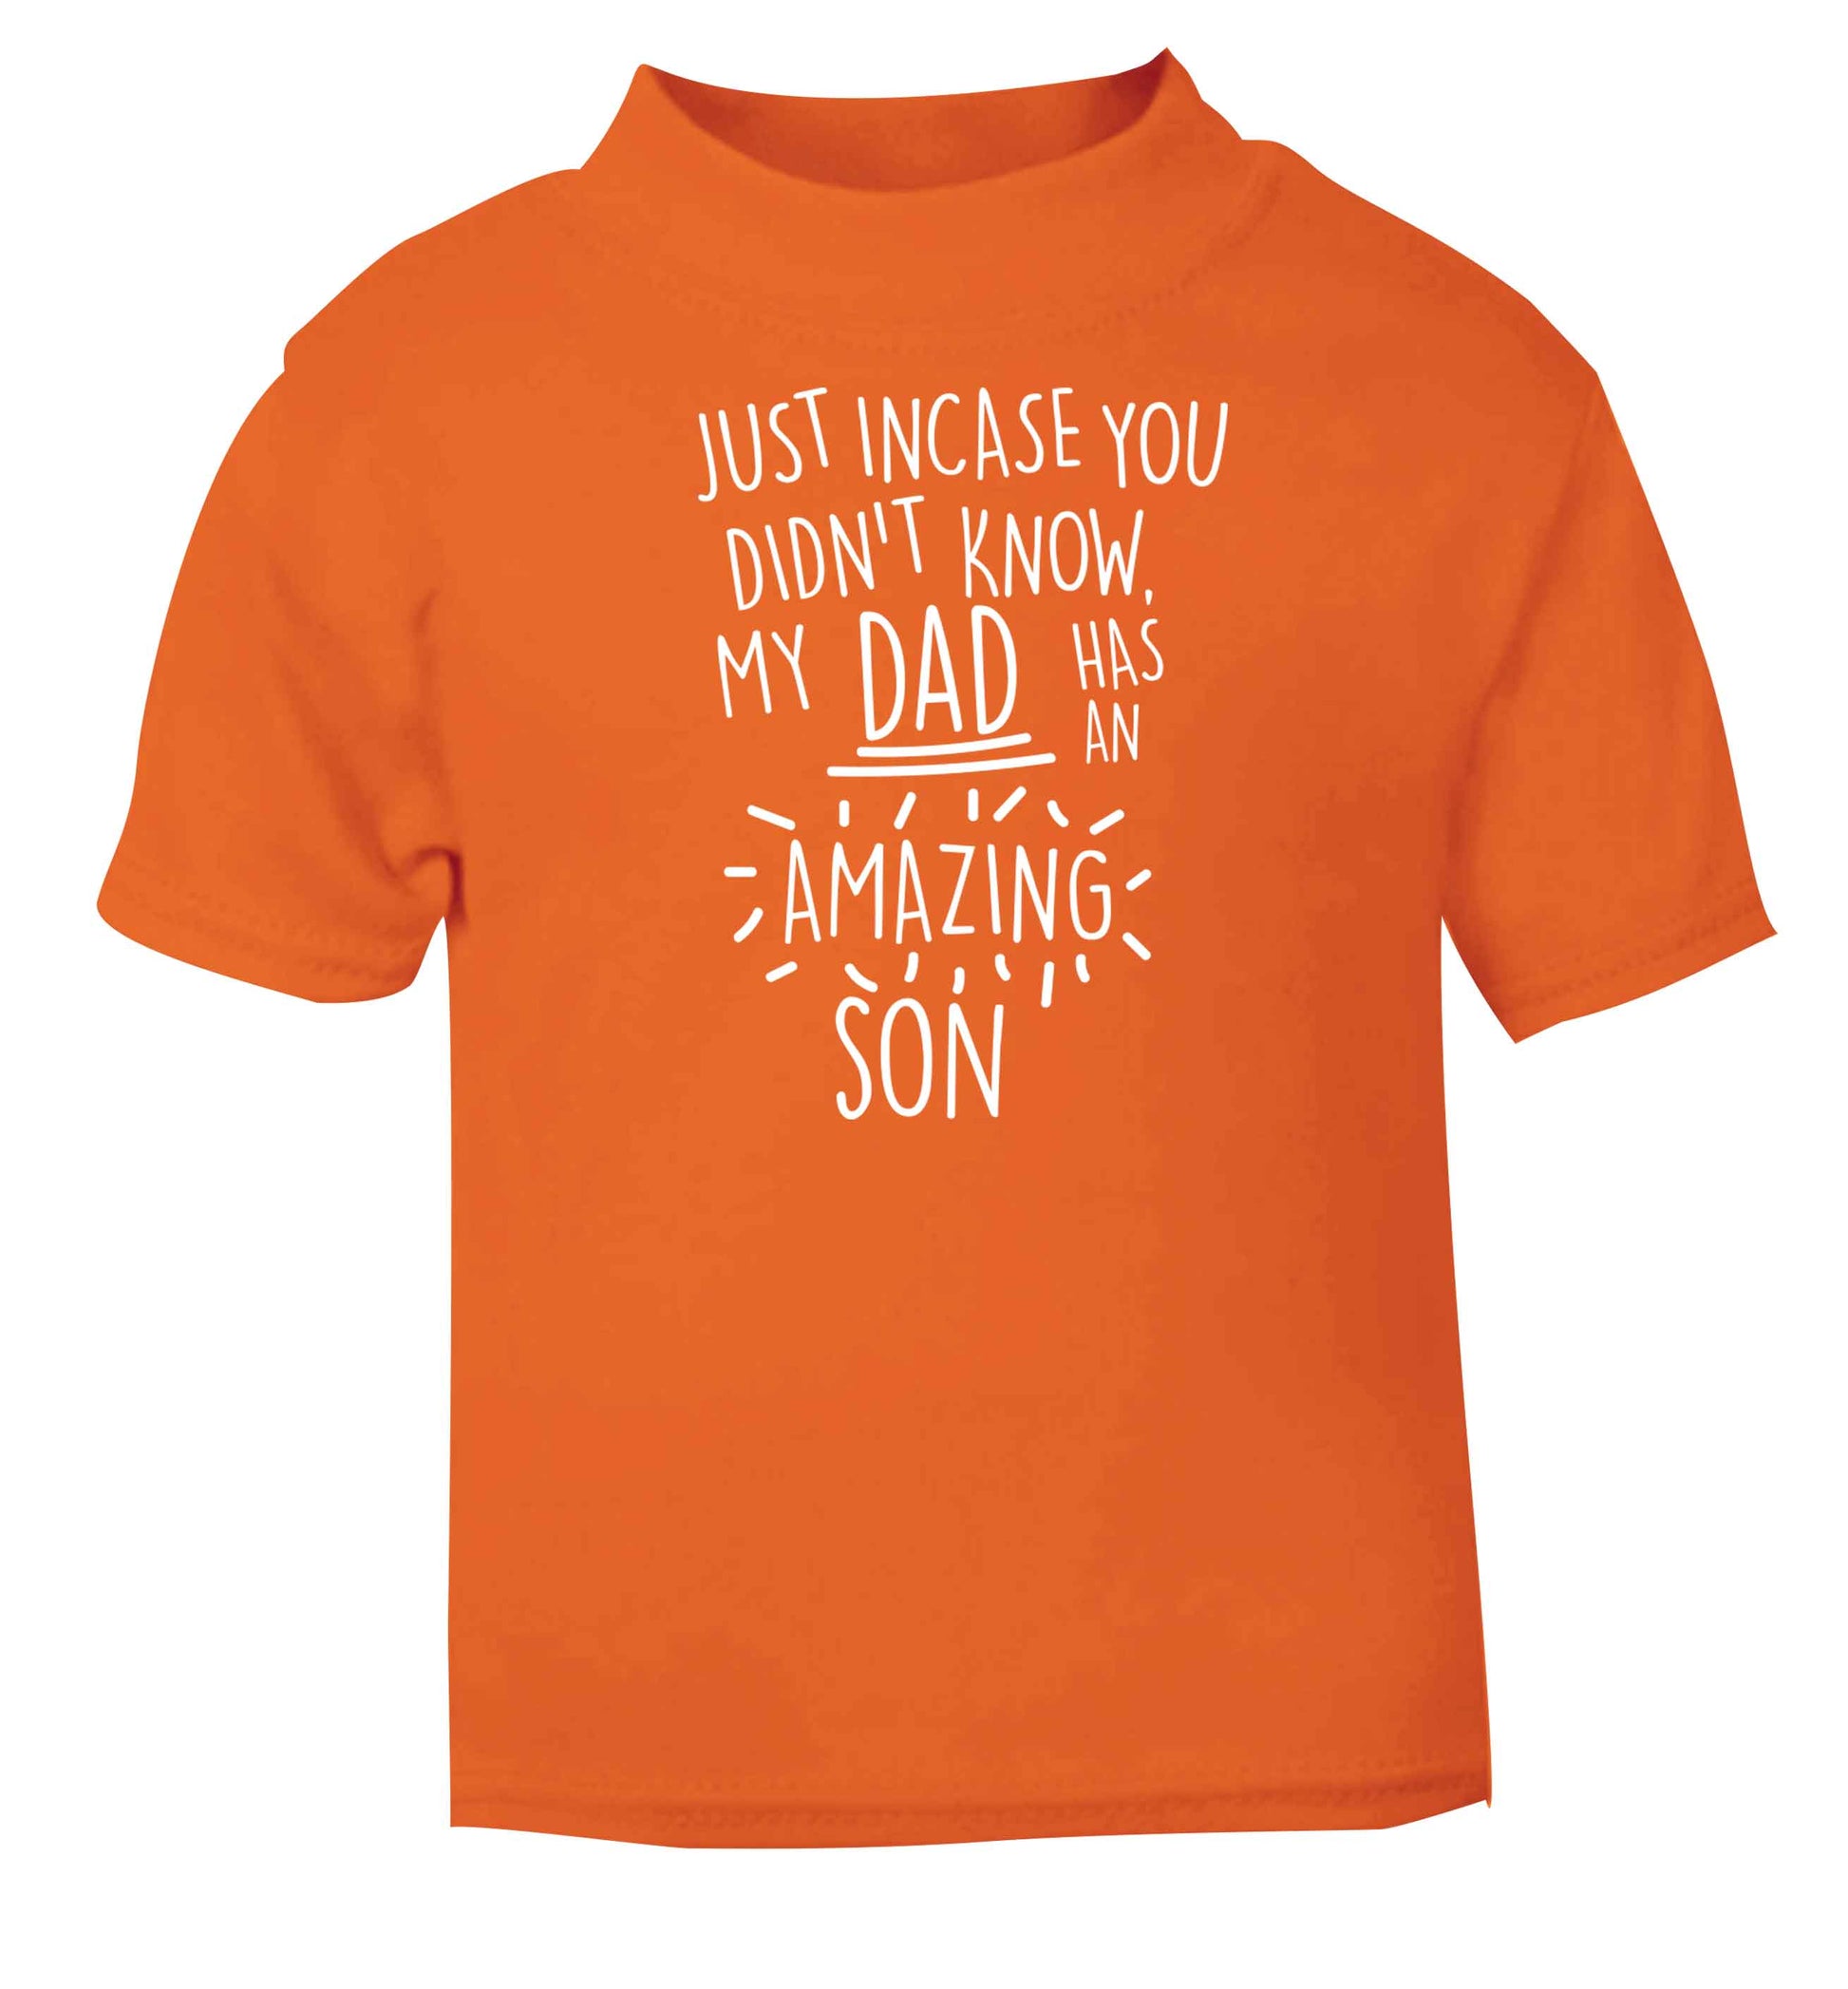 Just incase you didn't know my dad has an amazing son orange baby toddler Tshirt 2 Years